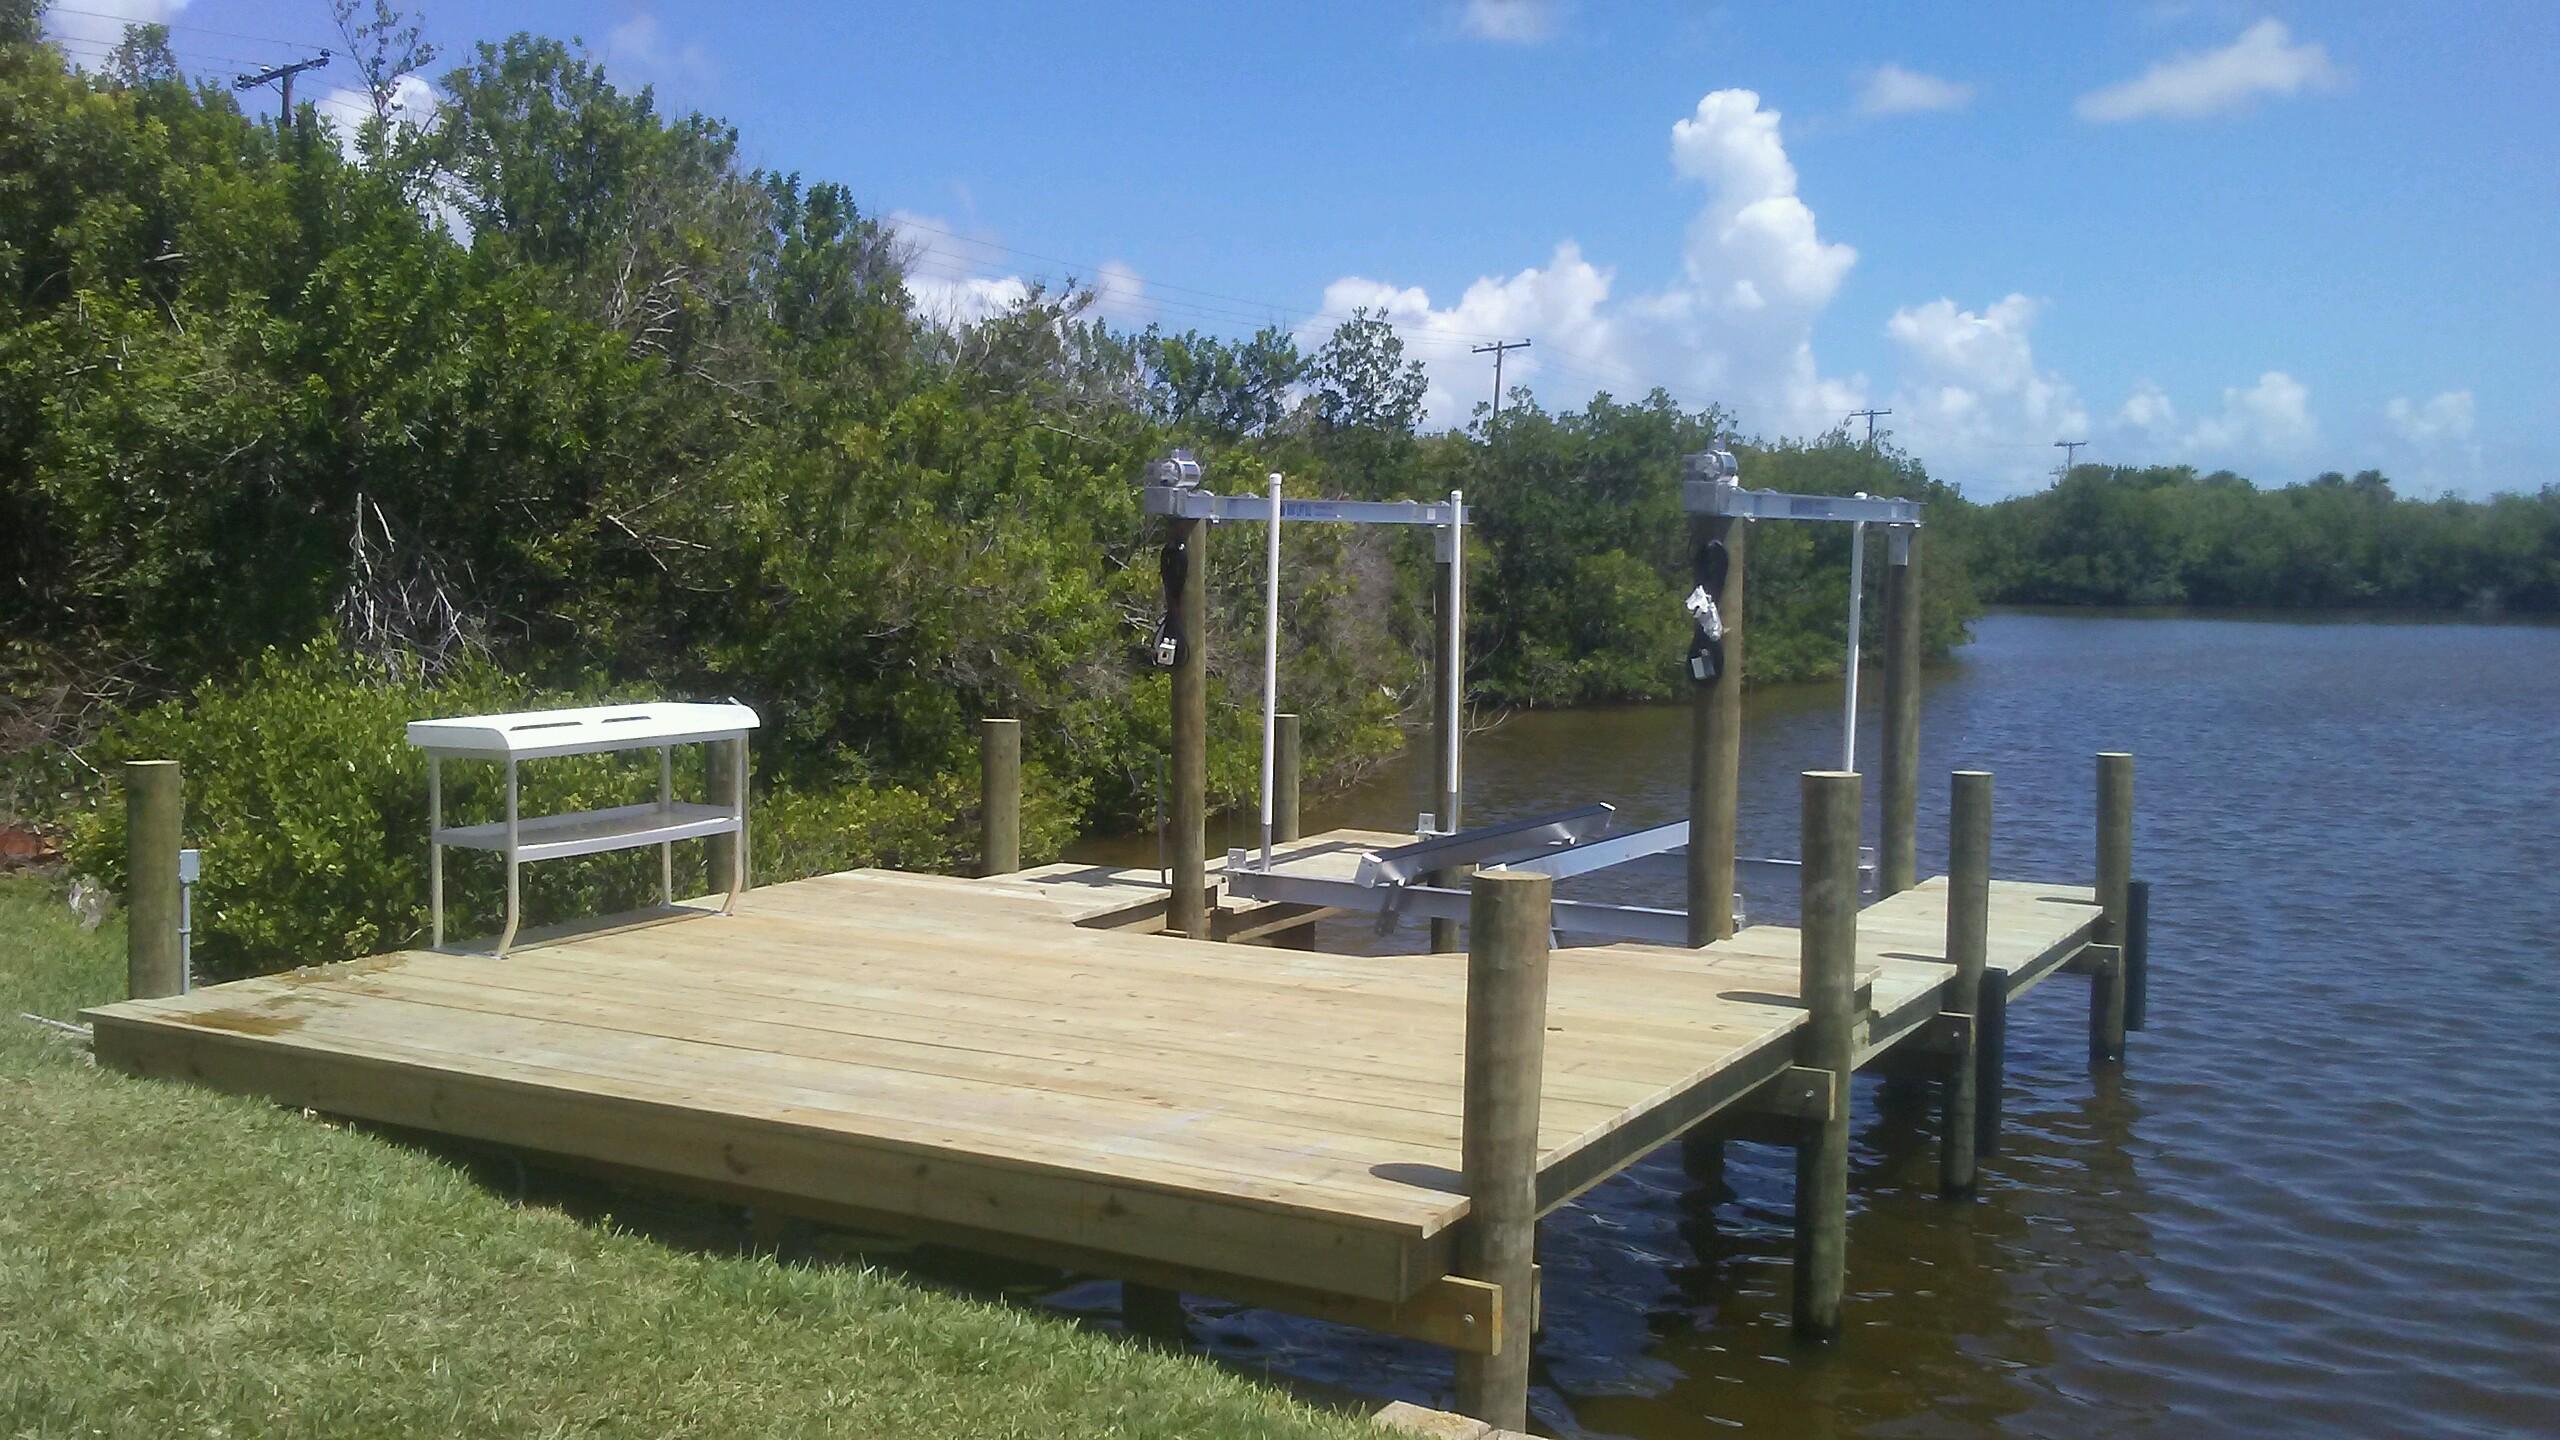 Boat Supplies, Fishing Gear & More - West Melbourne, FL 32904